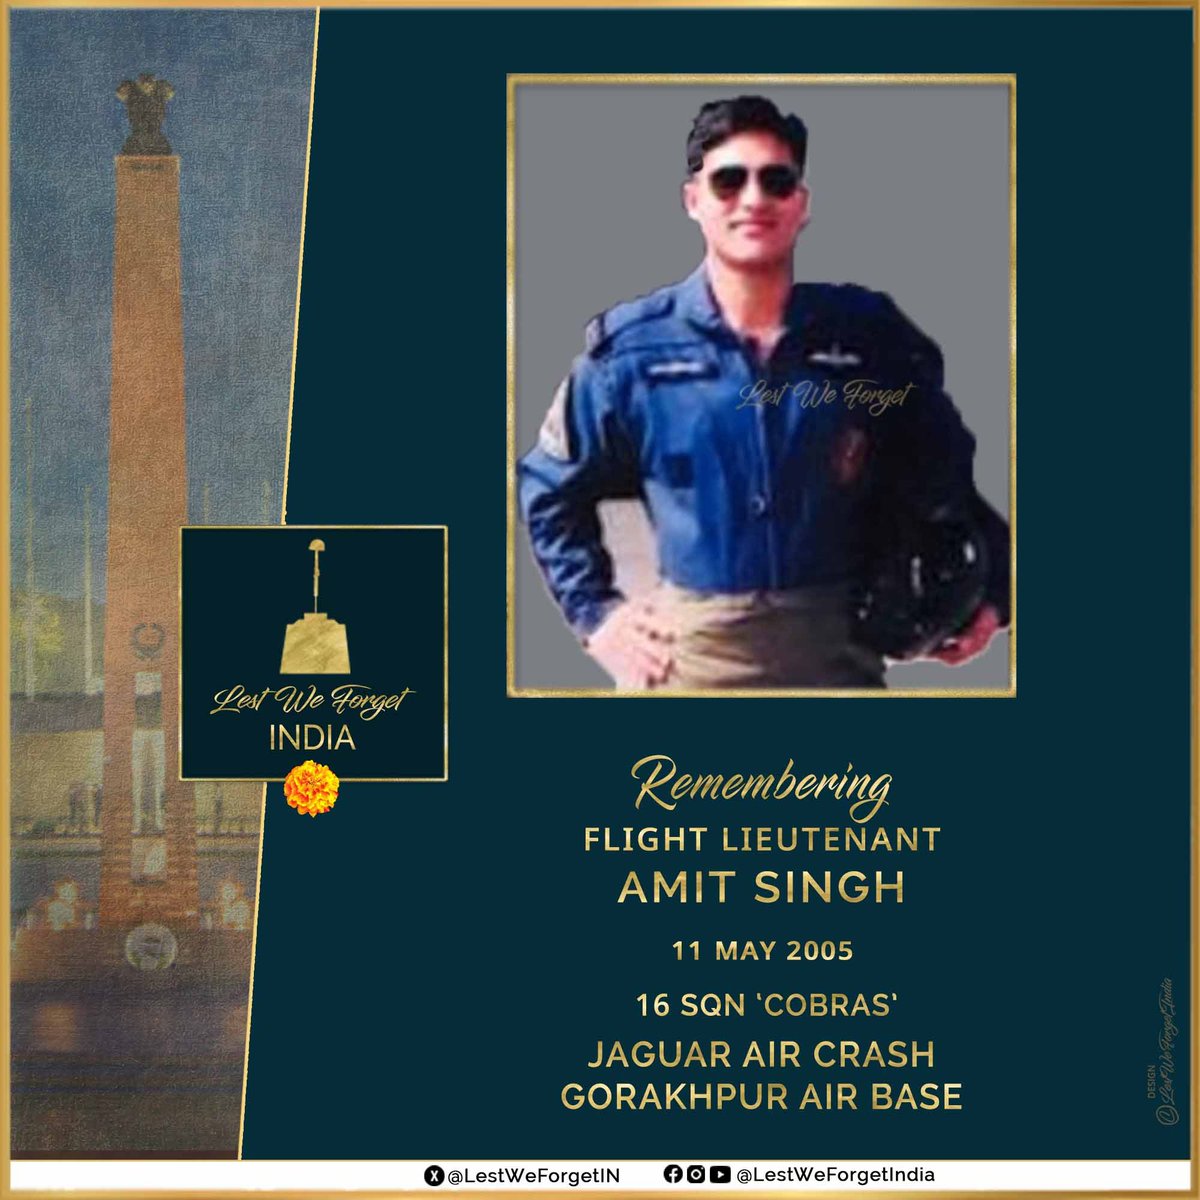 Top of the course, a Sword of Honour, gone but not forgotten #LestWeForgetIndia🇮🇳 Flt Lt Amit Singh, 16 SQN, 'Cobras' #IndianAirForce. The #IndianBrave lost his life in a Jaguar aircraft crash #OnThisDay 11 May in 2005, soon after take off from Gorakhpur airbase,…